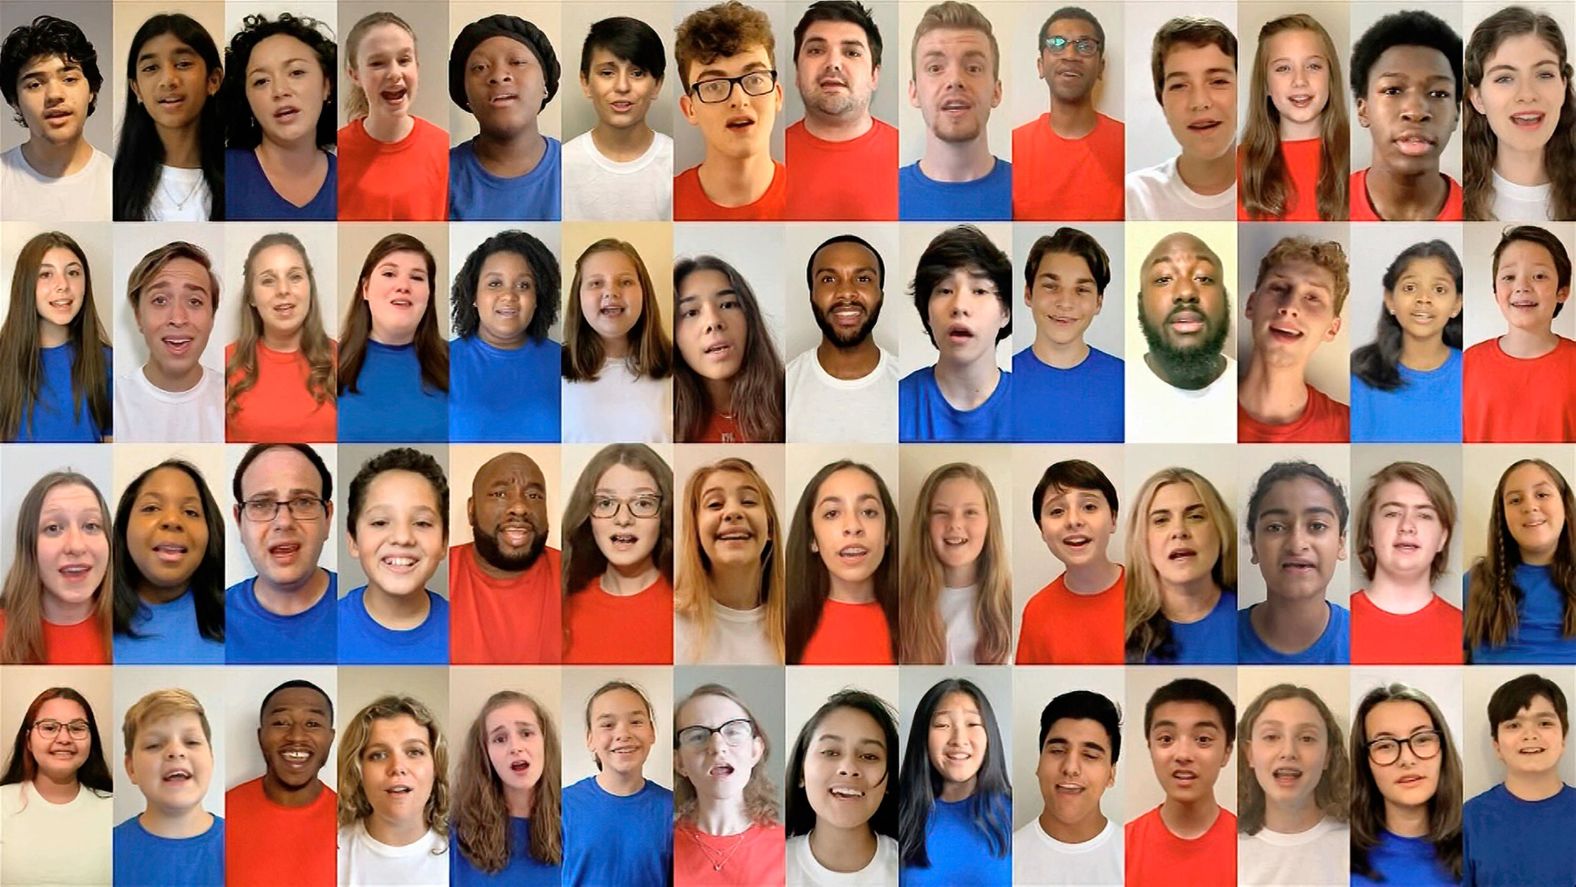 People from across the country sing the National Anthem together on Monday.